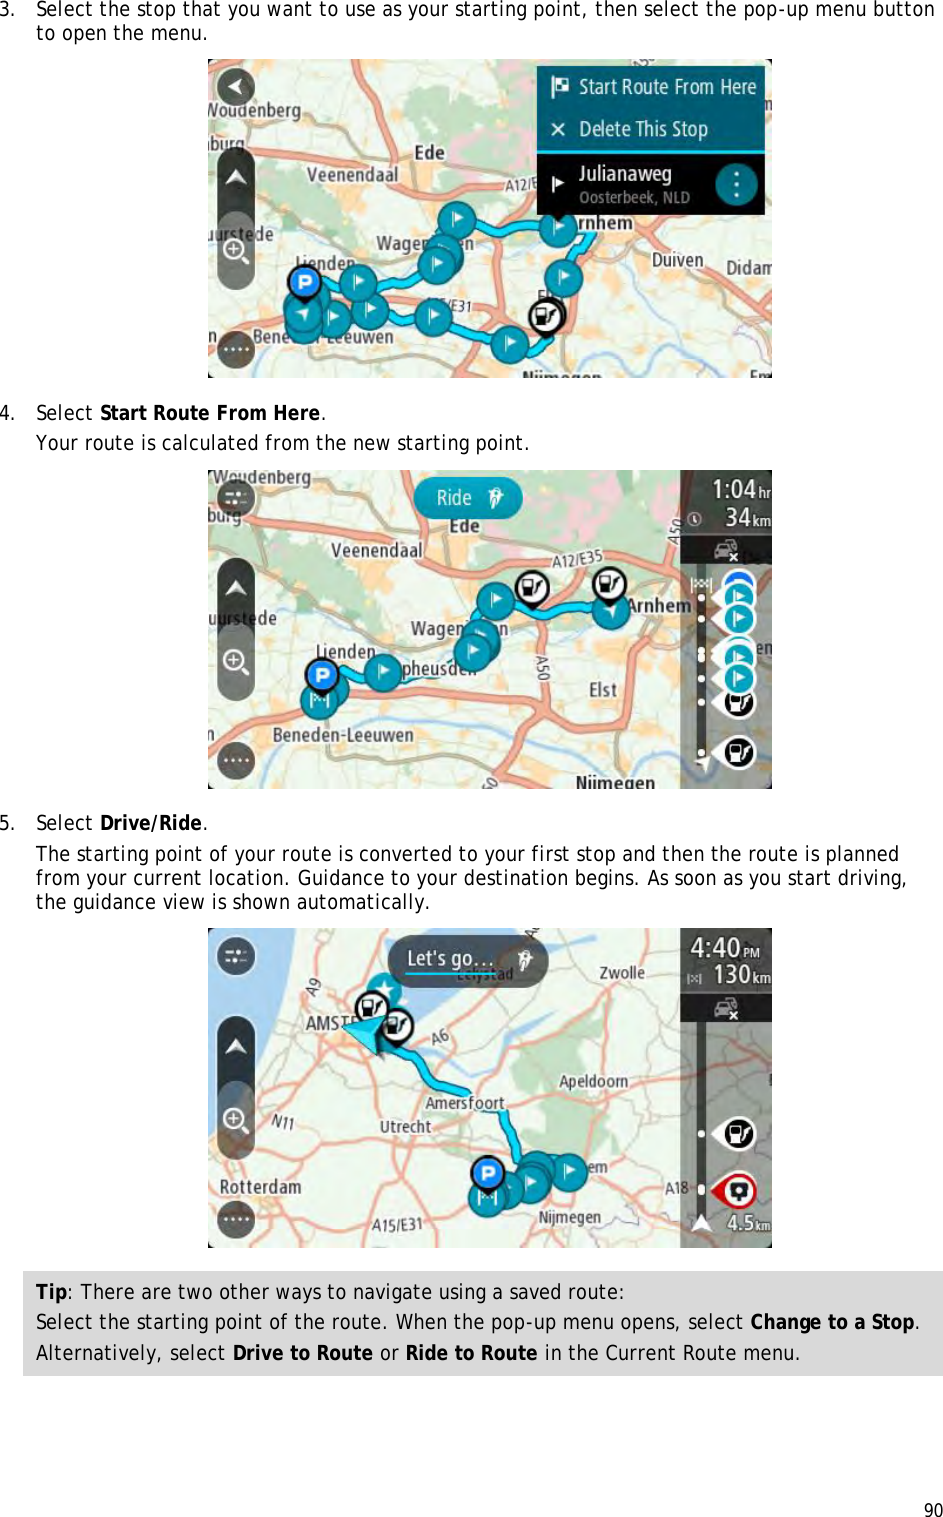  90  3. Select the stop that you want to use as your starting point, then select the pop-up menu button to open the menu.  4. Select Start Route From Here. Your route is calculated from the new starting point.  5. Select Drive/Ride. The starting point of your route is converted to your first stop and then the route is planned from your current location. Guidance to your destination begins. As soon as you start driving, the guidance view is shown automatically.  Tip: There are two other ways to navigate using a saved route: Select the starting point of the route. When the pop-up menu opens, select Change to a Stop. Alternatively, select Drive to Route or Ride to Route in the Current Route menu.  